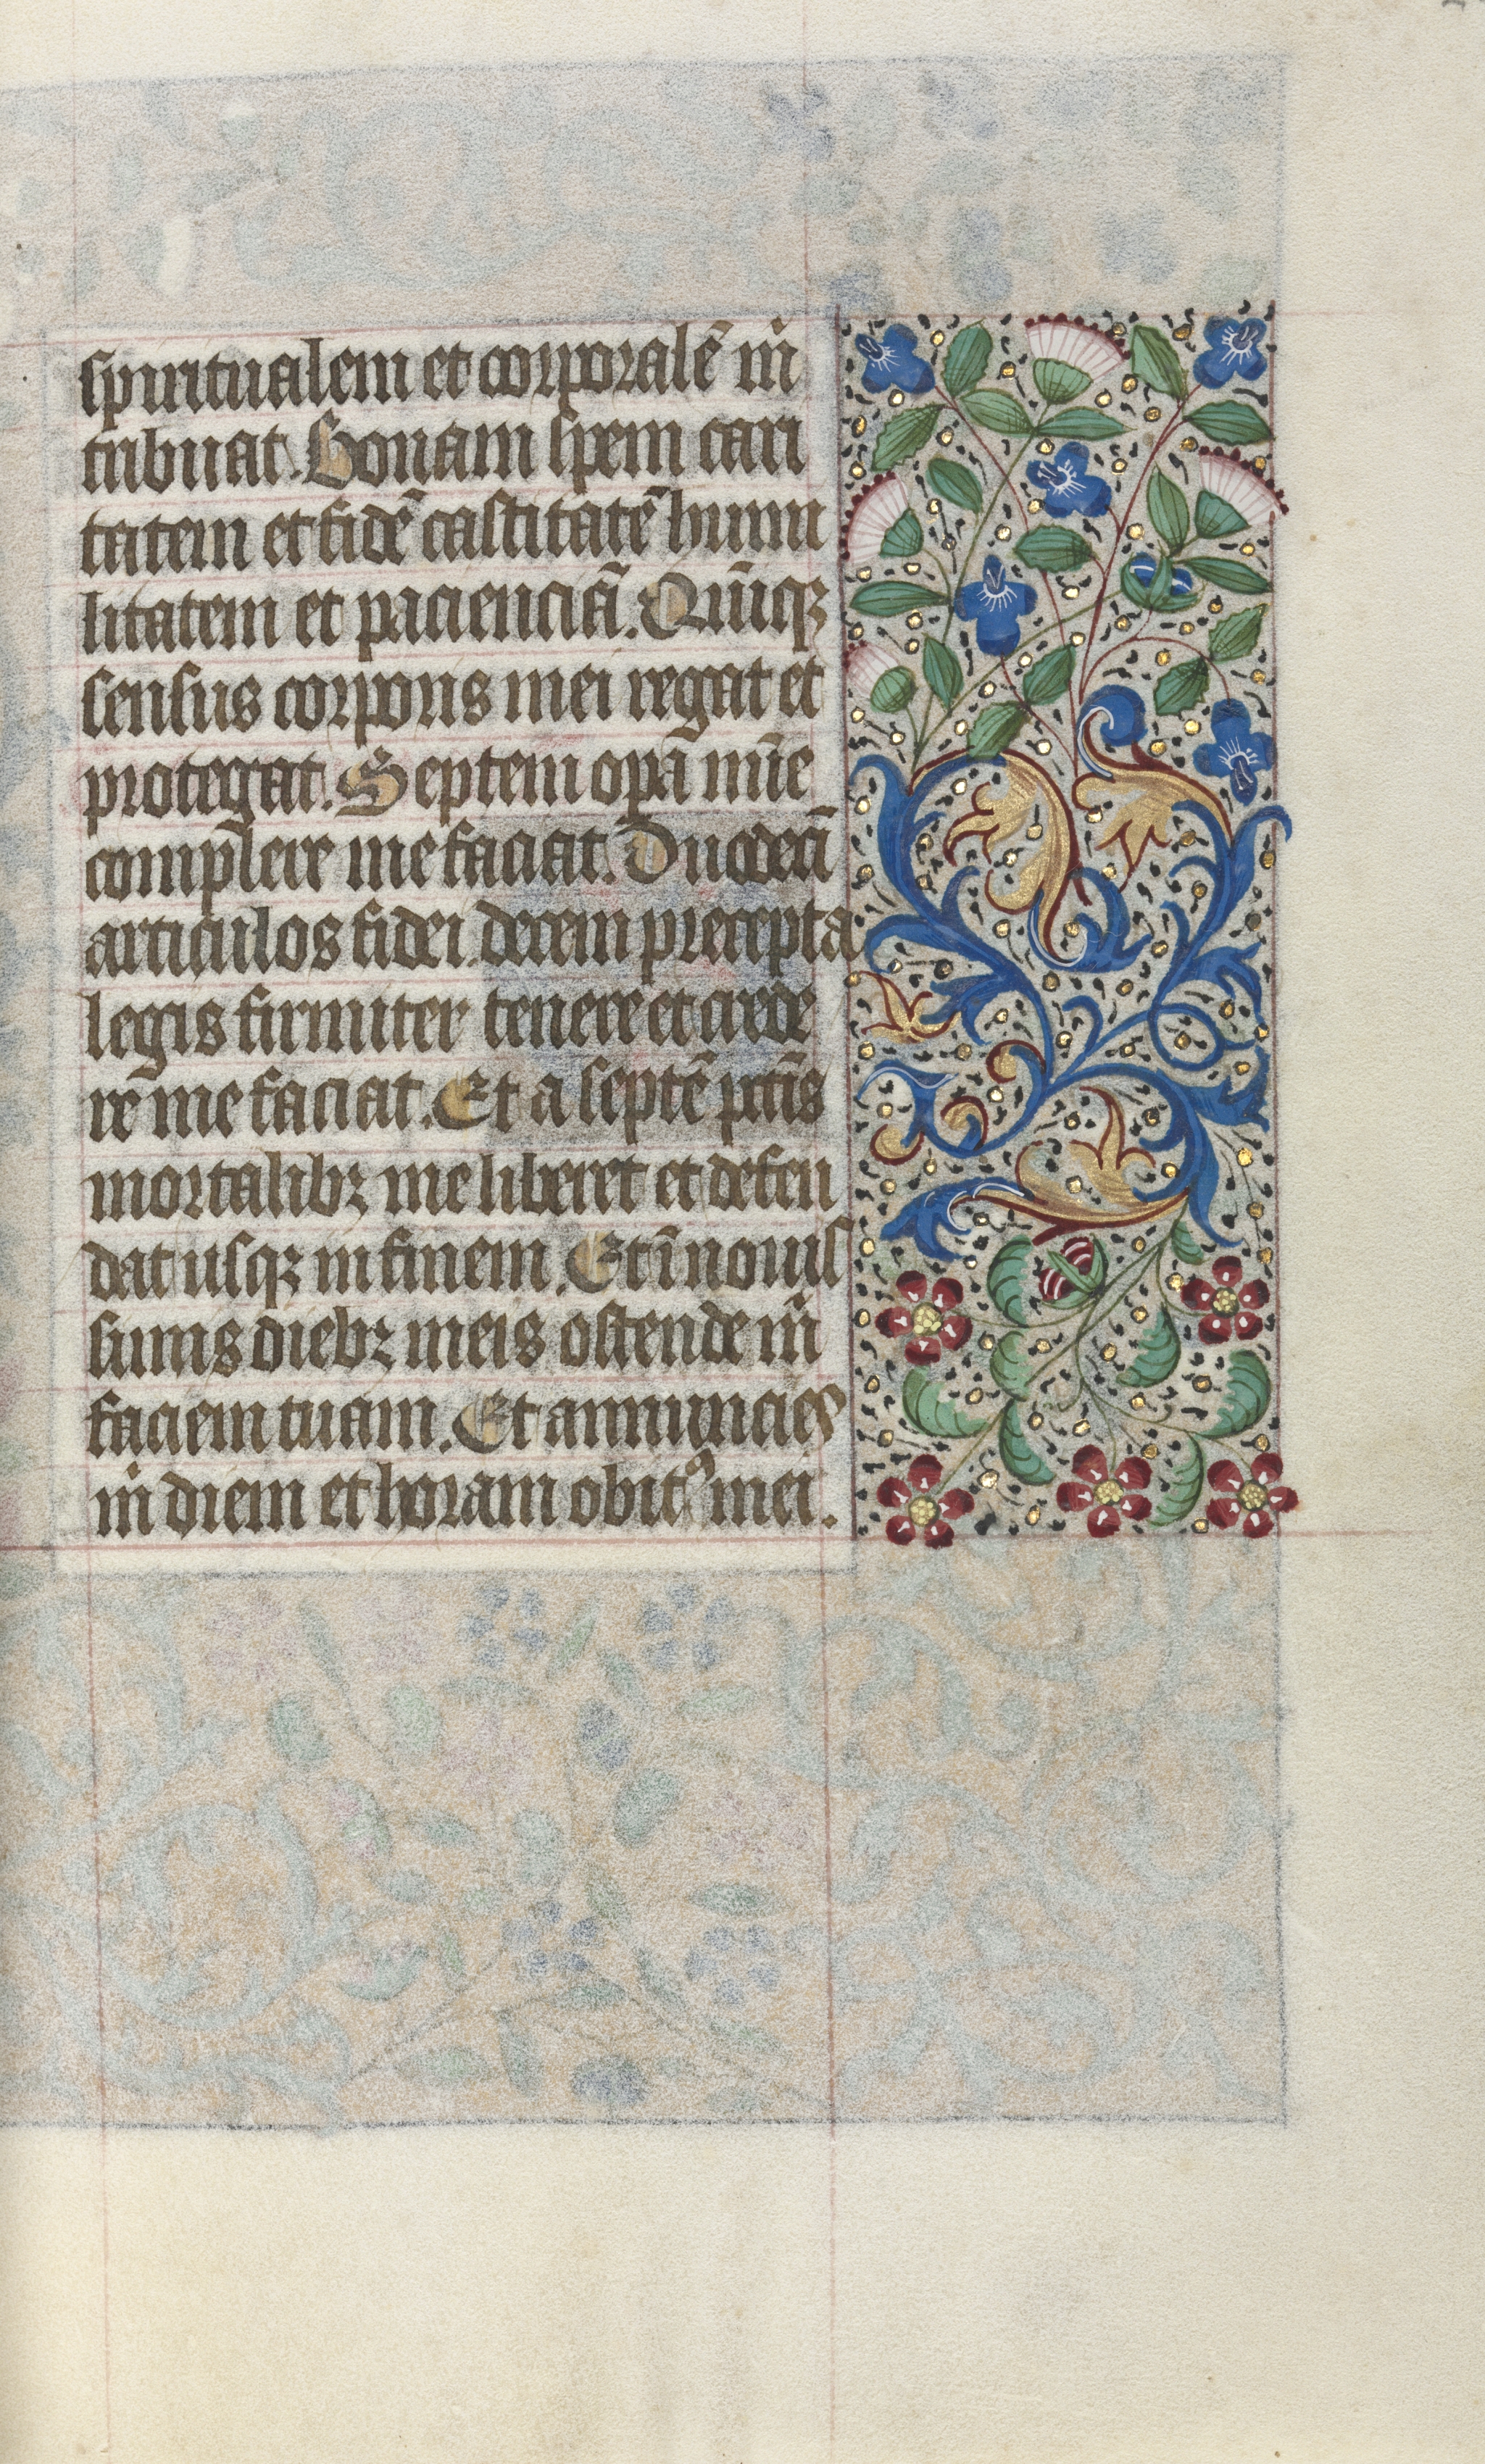 Book of Hours (Use of Rouen): fol. 22r